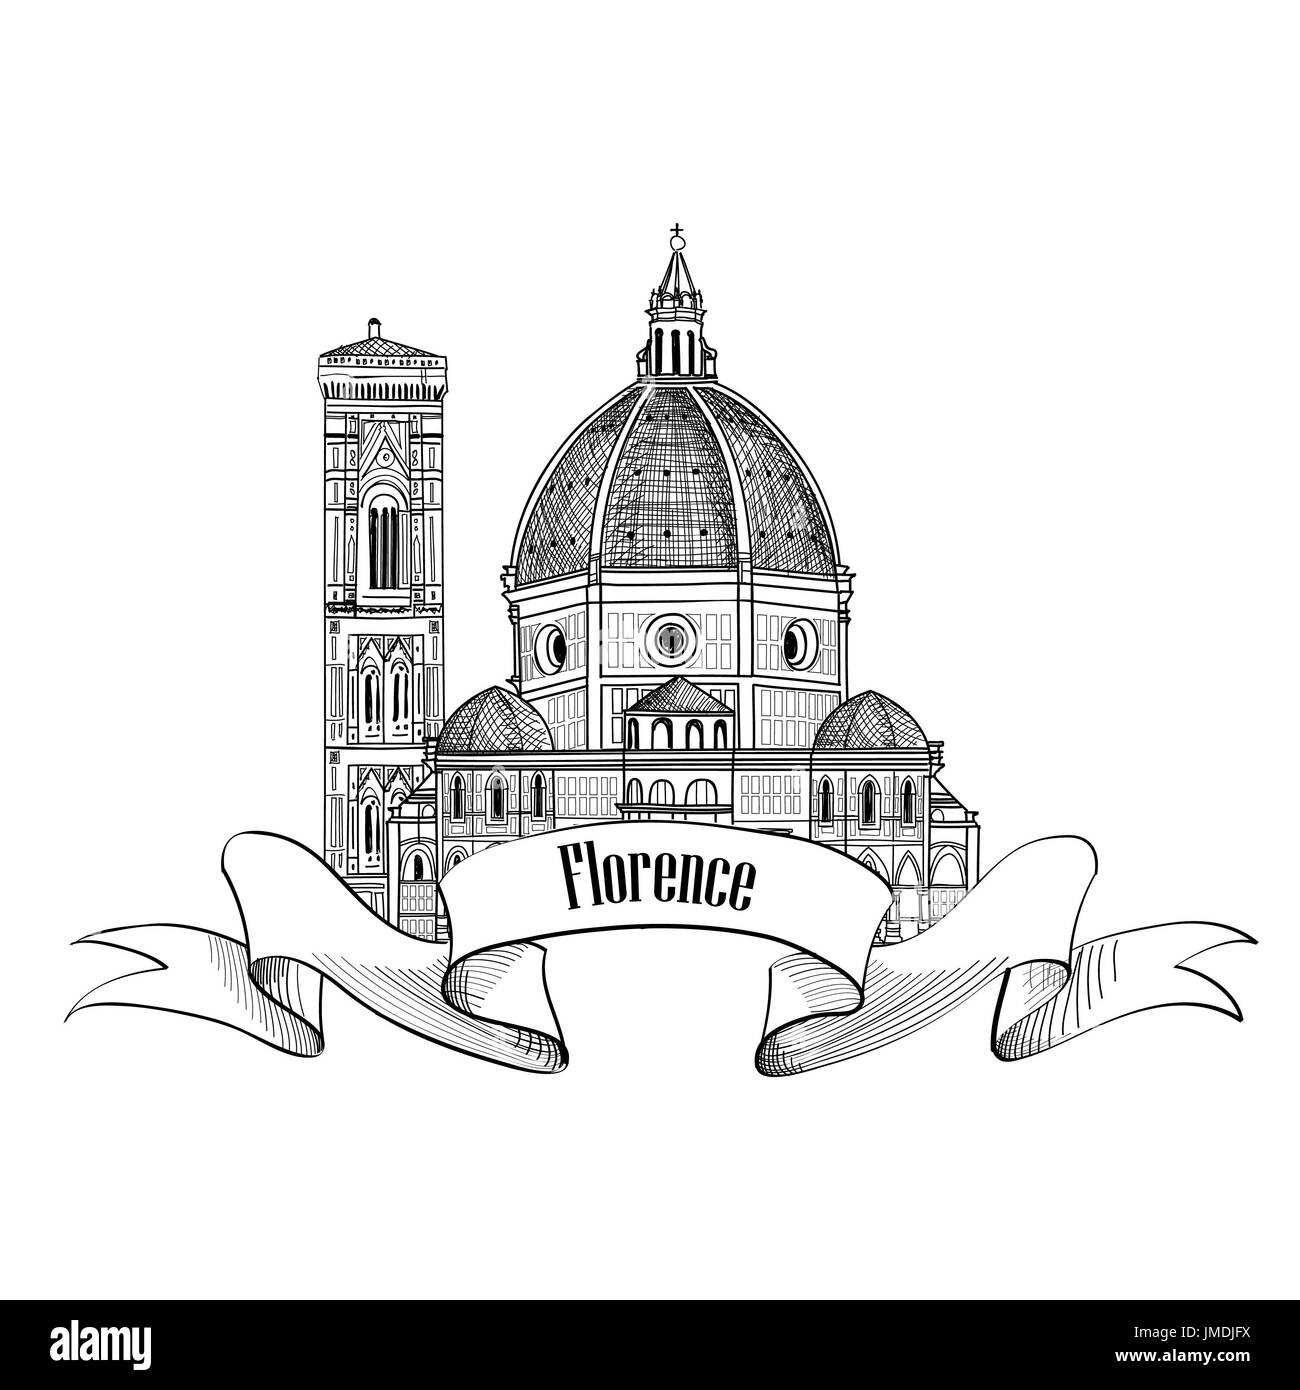 Florence symbol. Travel Italy icon. Hand drawn sketch